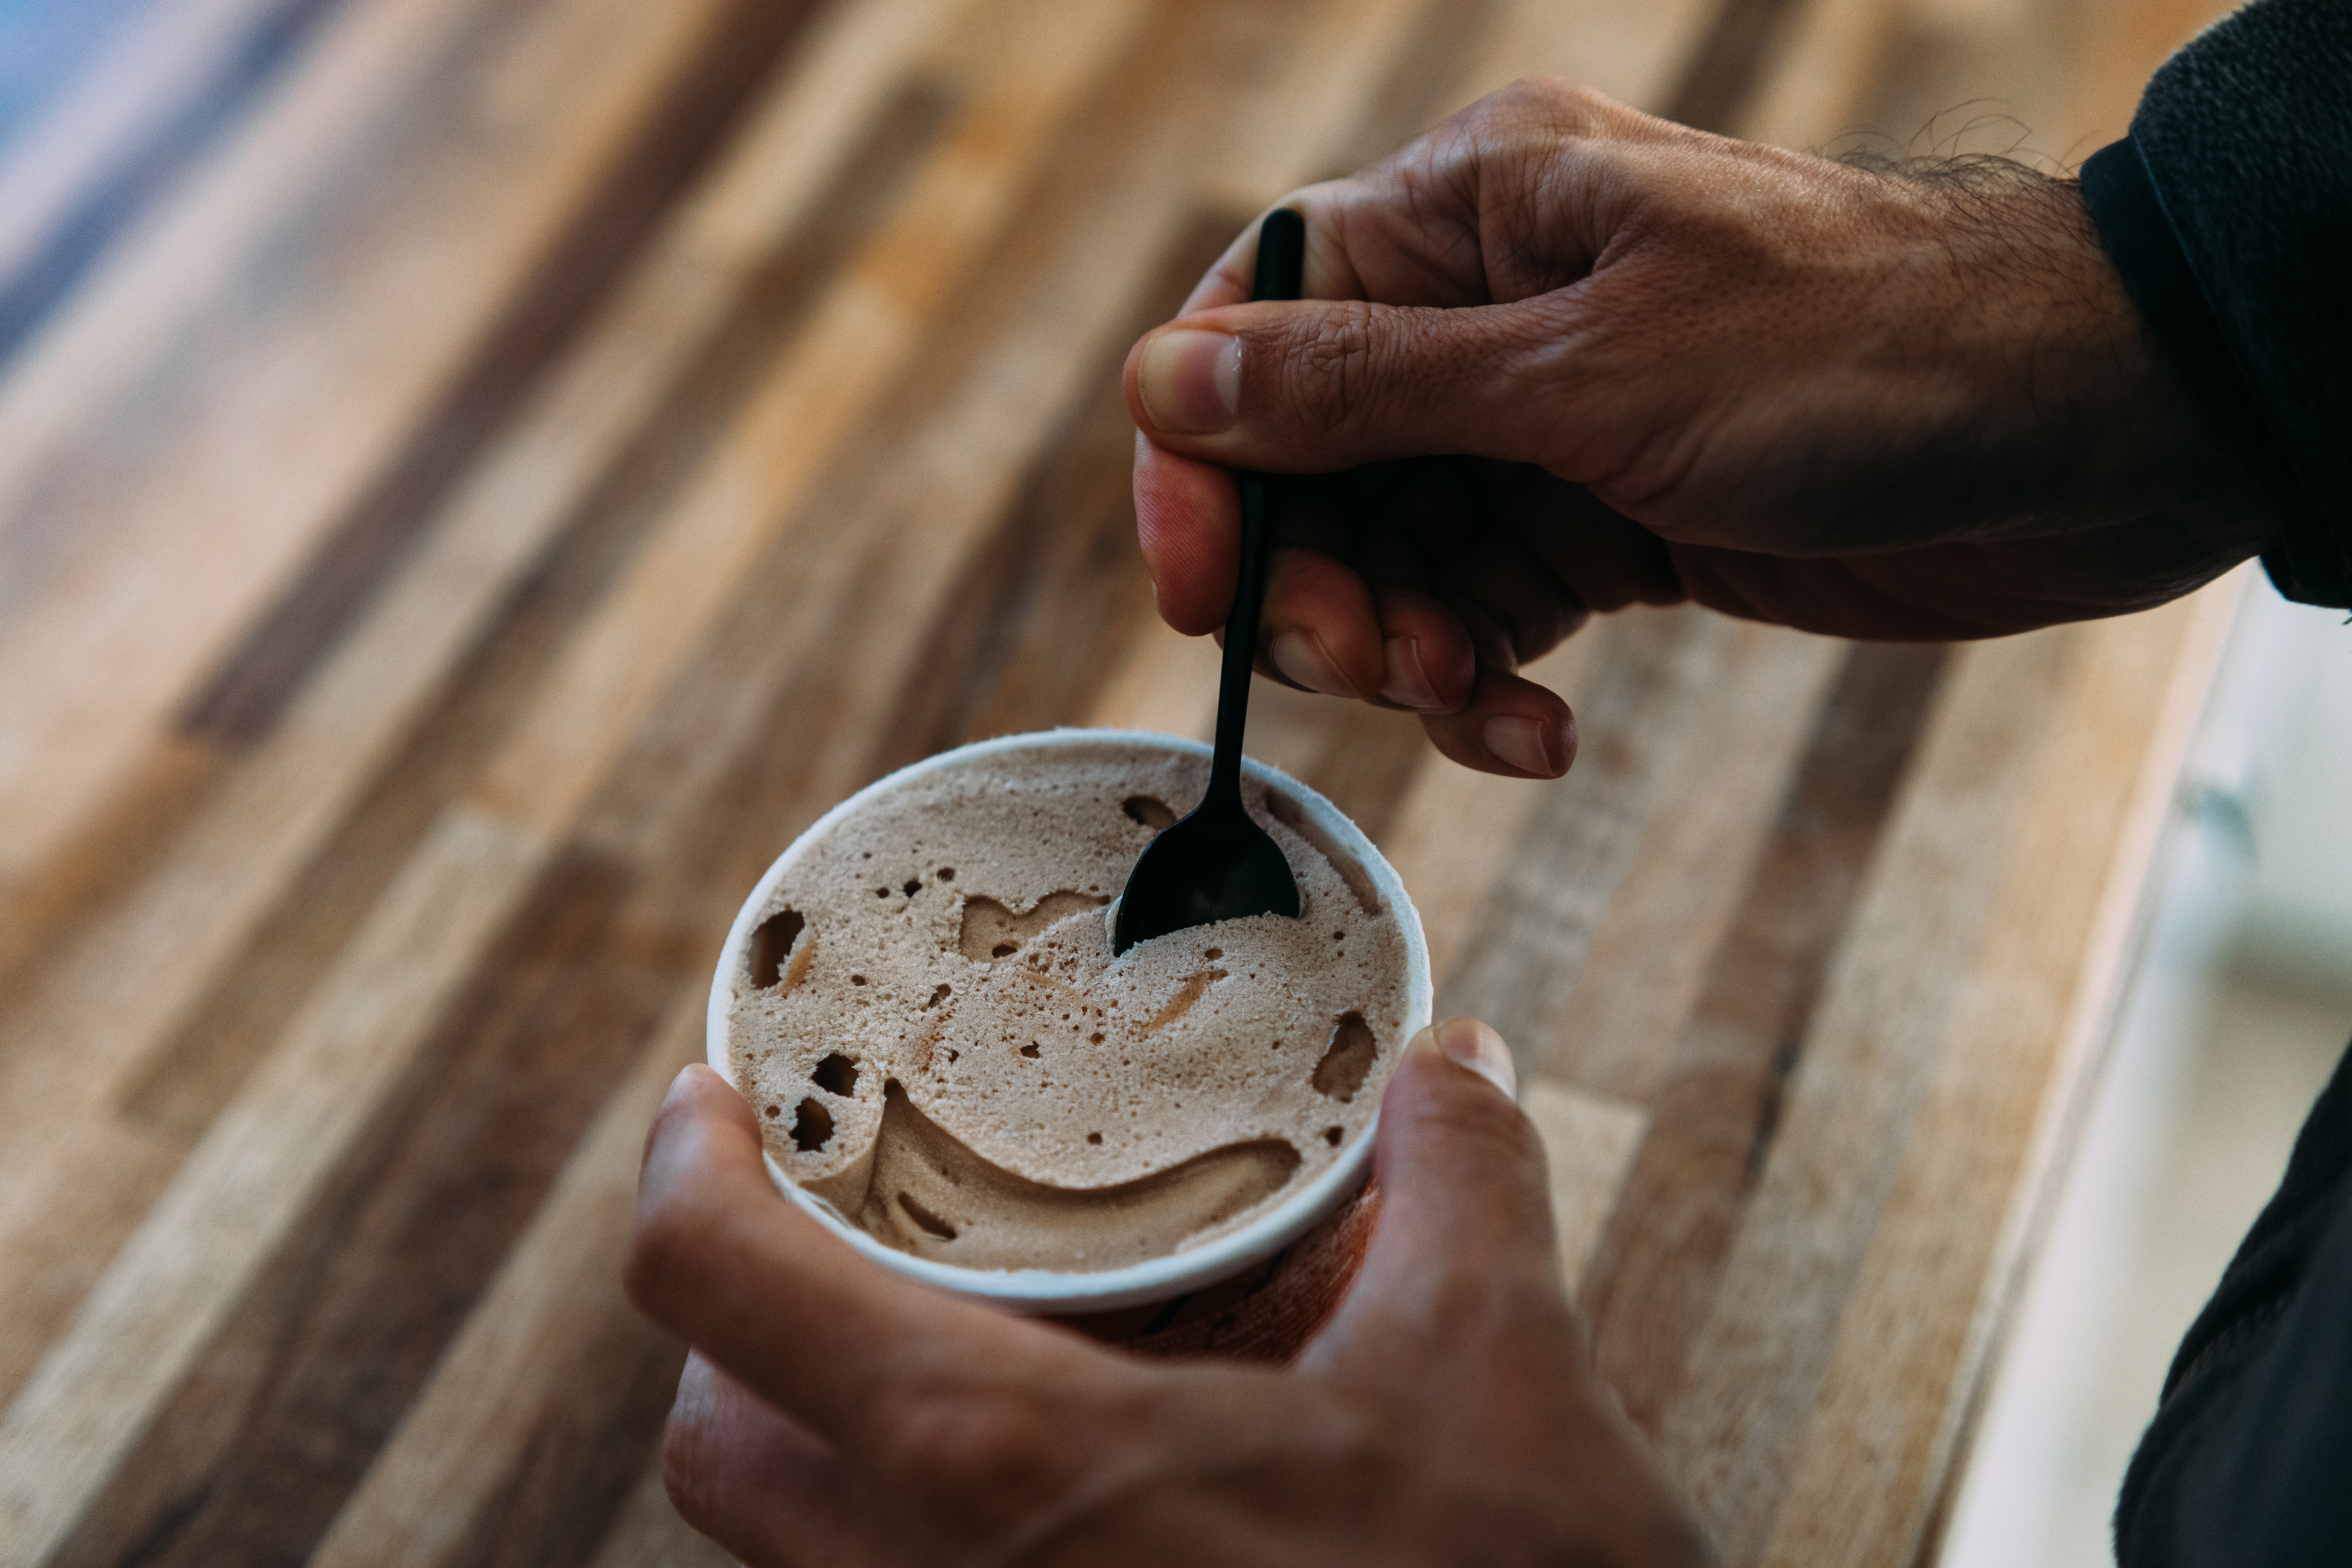 Person holding a cup of frothy coffee with a spoon, on a wooden surface